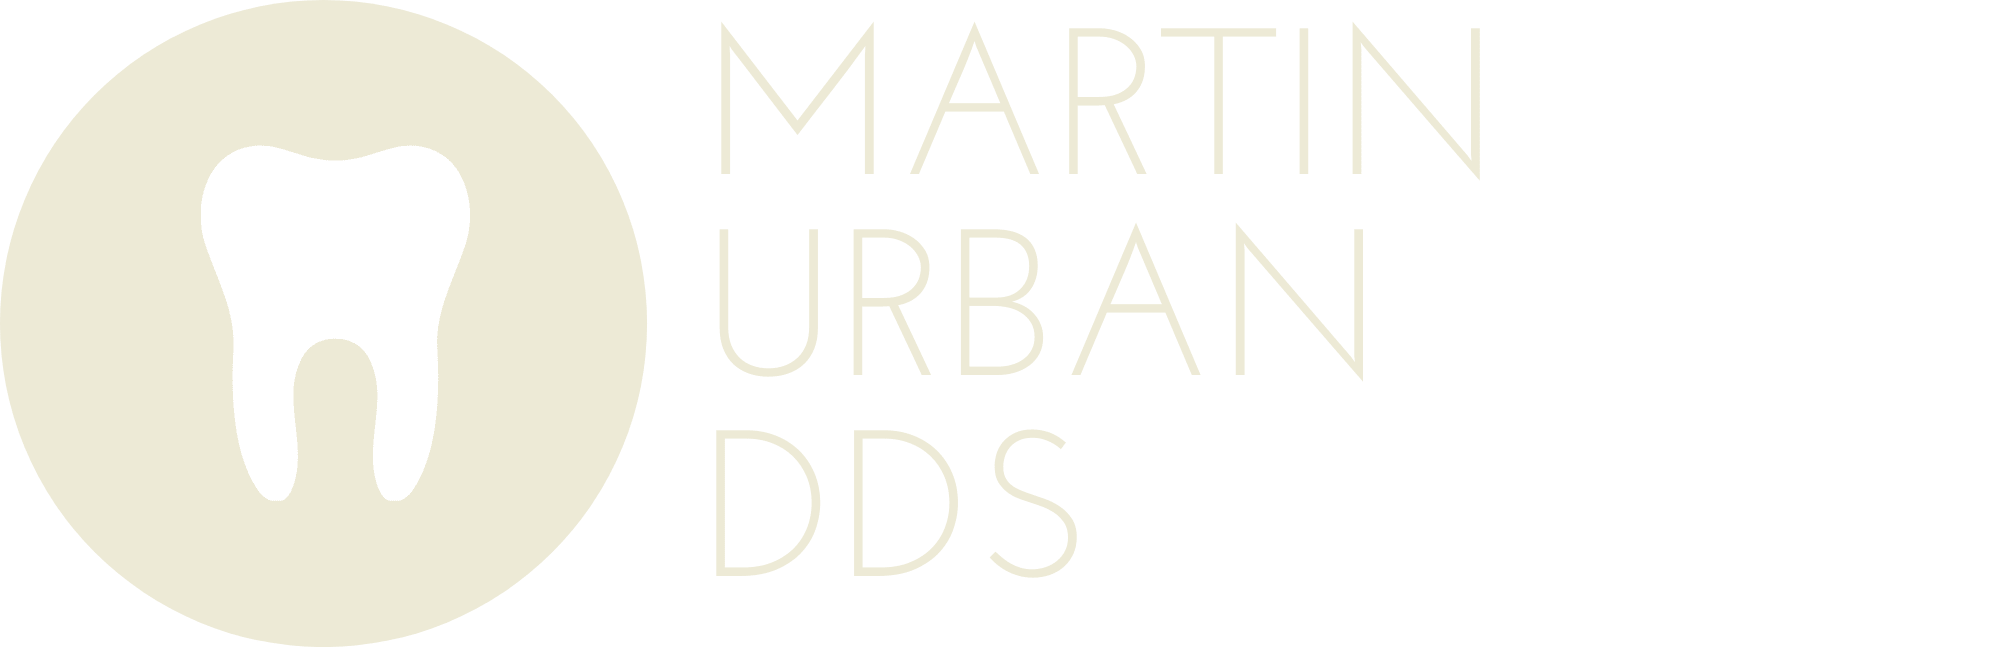 Martin Urban DDS | Professional Overview